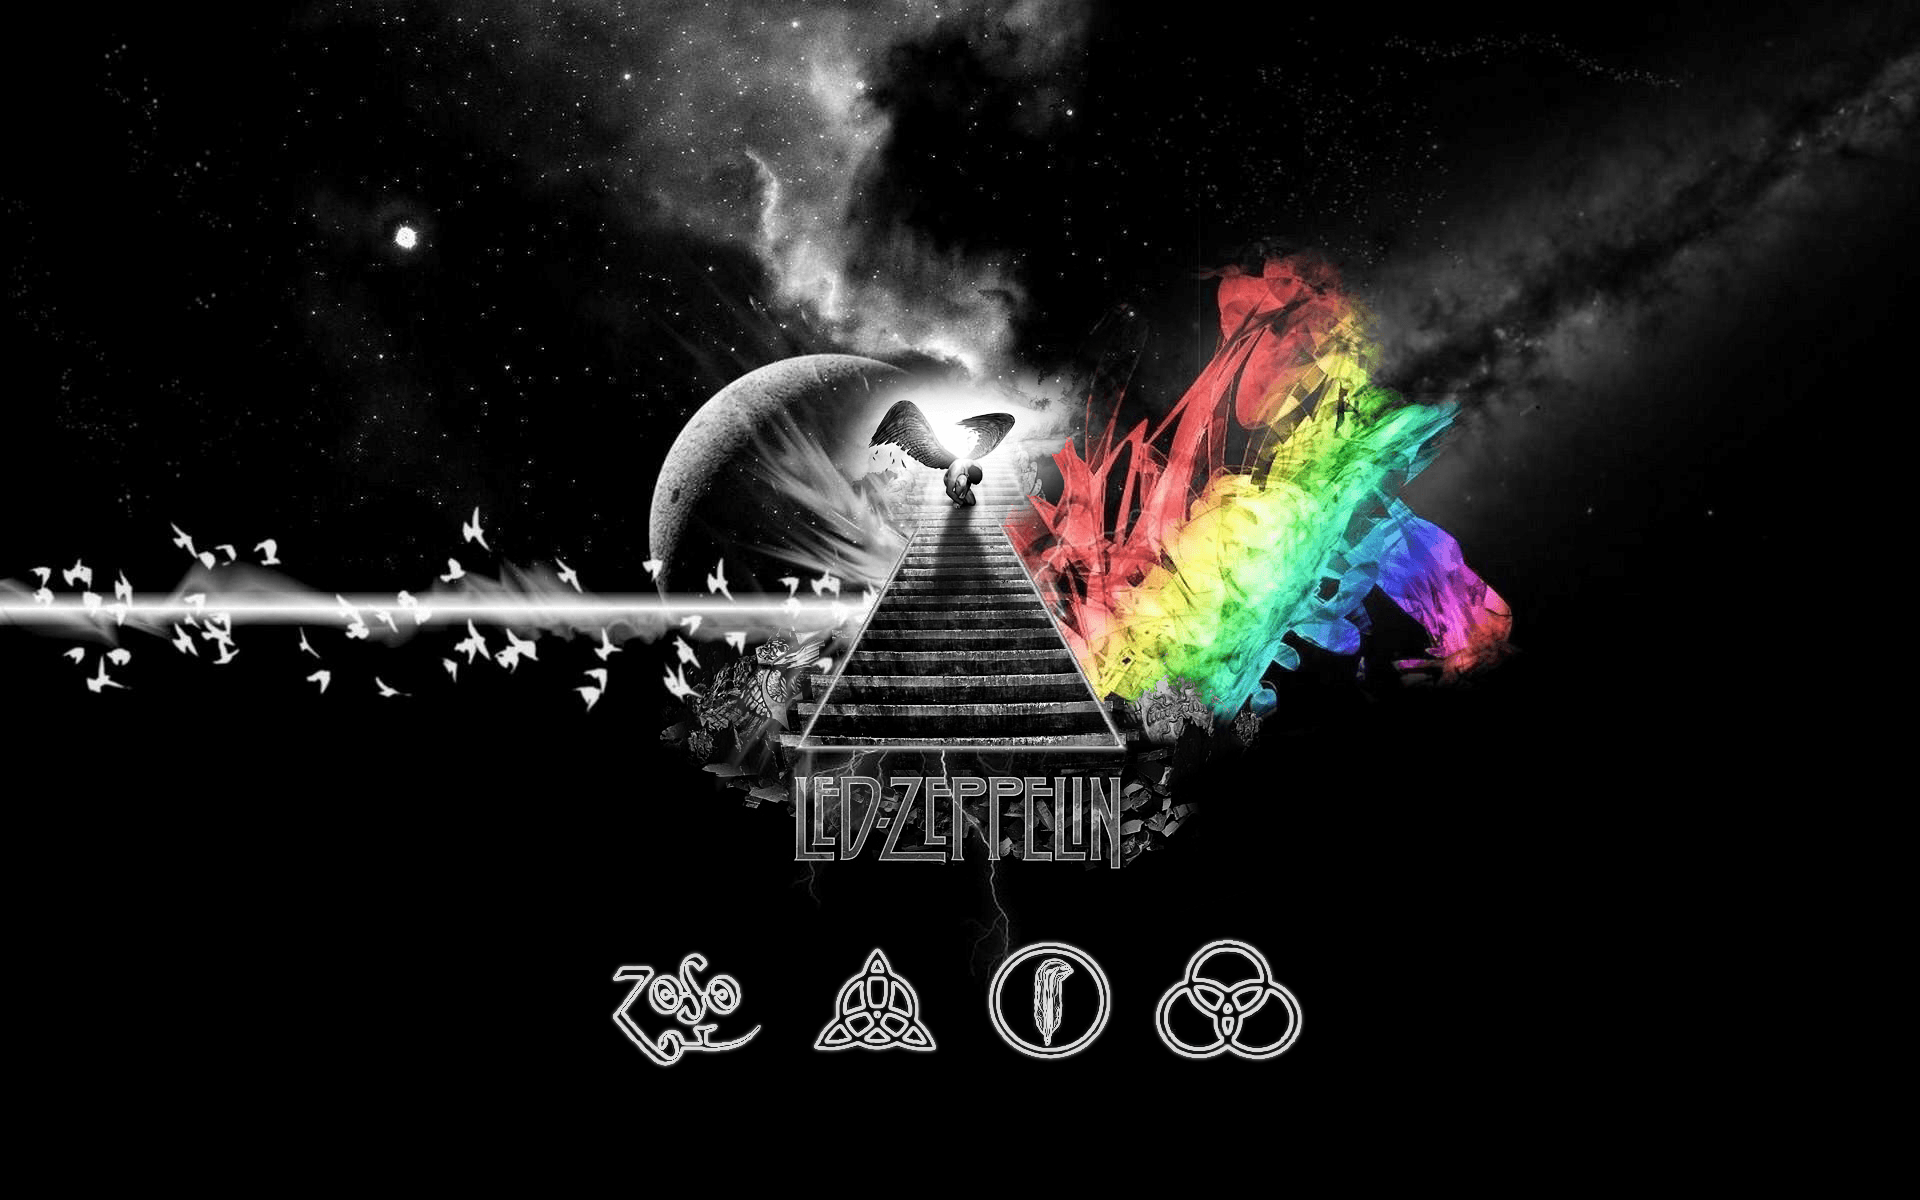 Awesome Background Wallpaper. Led Zeppelin HQFX Wallpaper